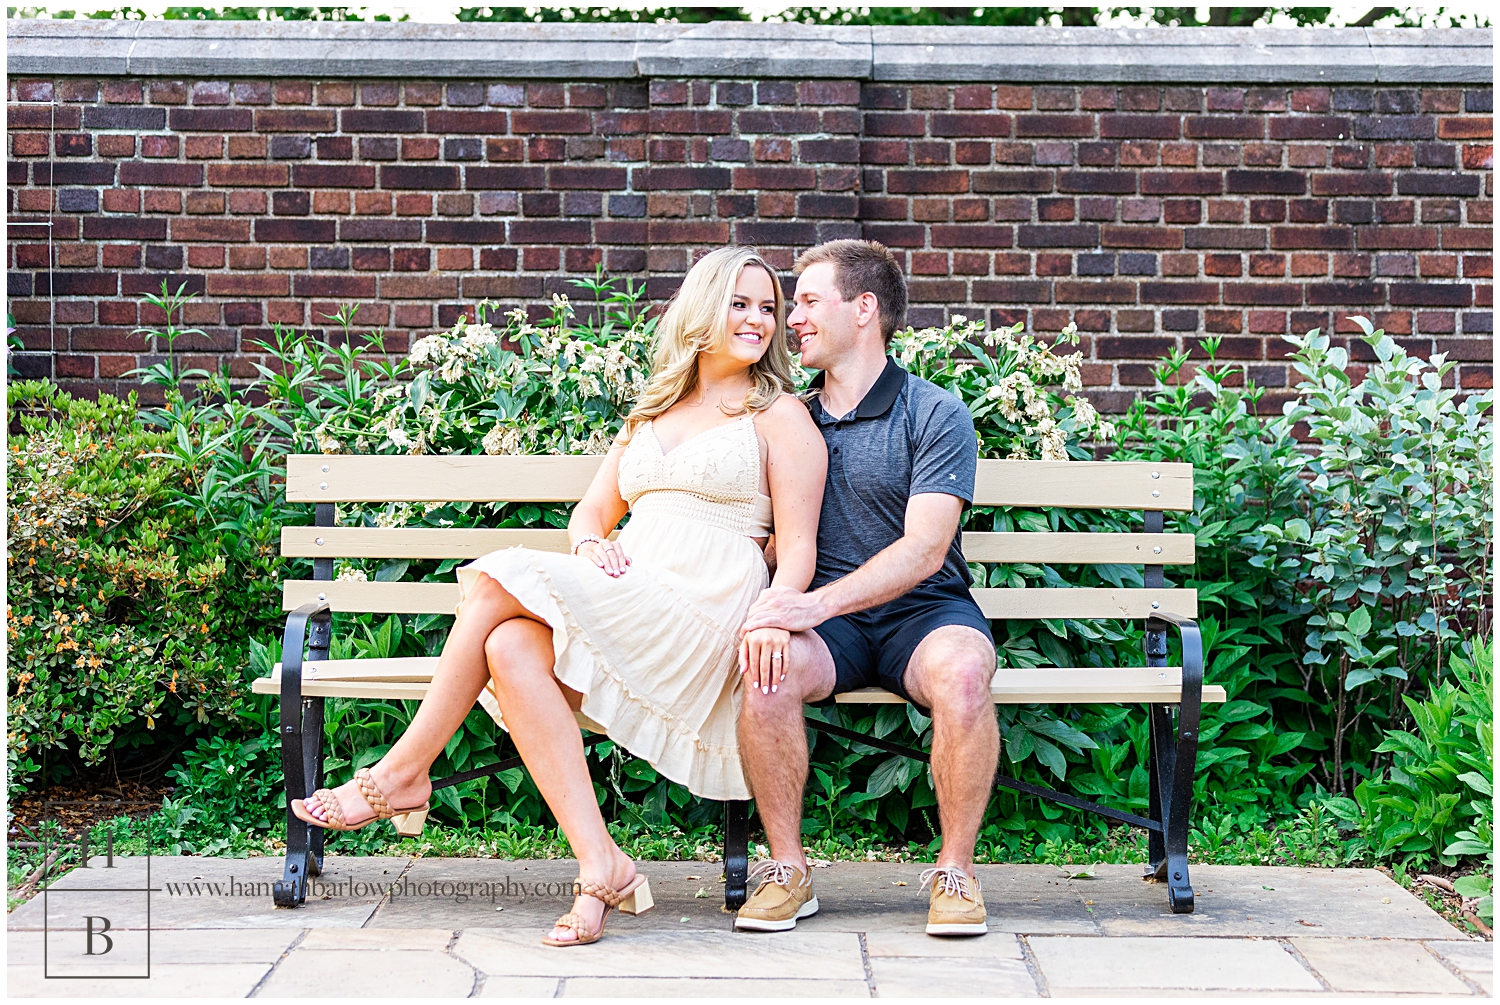 Man and woman sit on bench and pose for engagement photos.